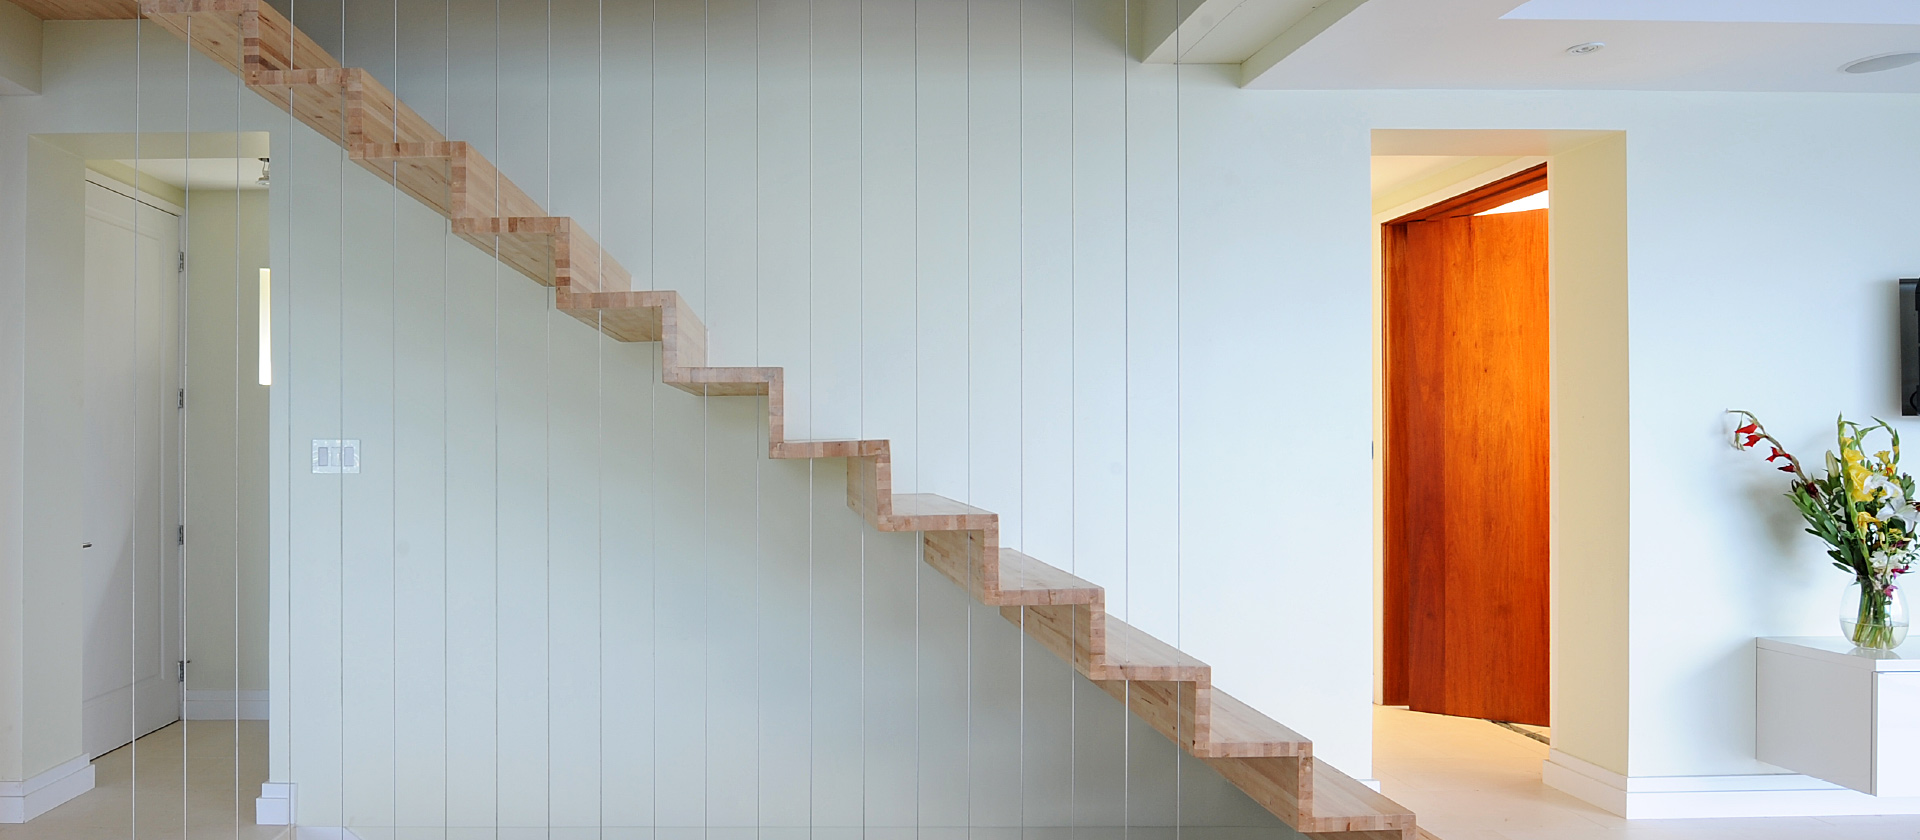 Freestanding staircase with vertical cable guard